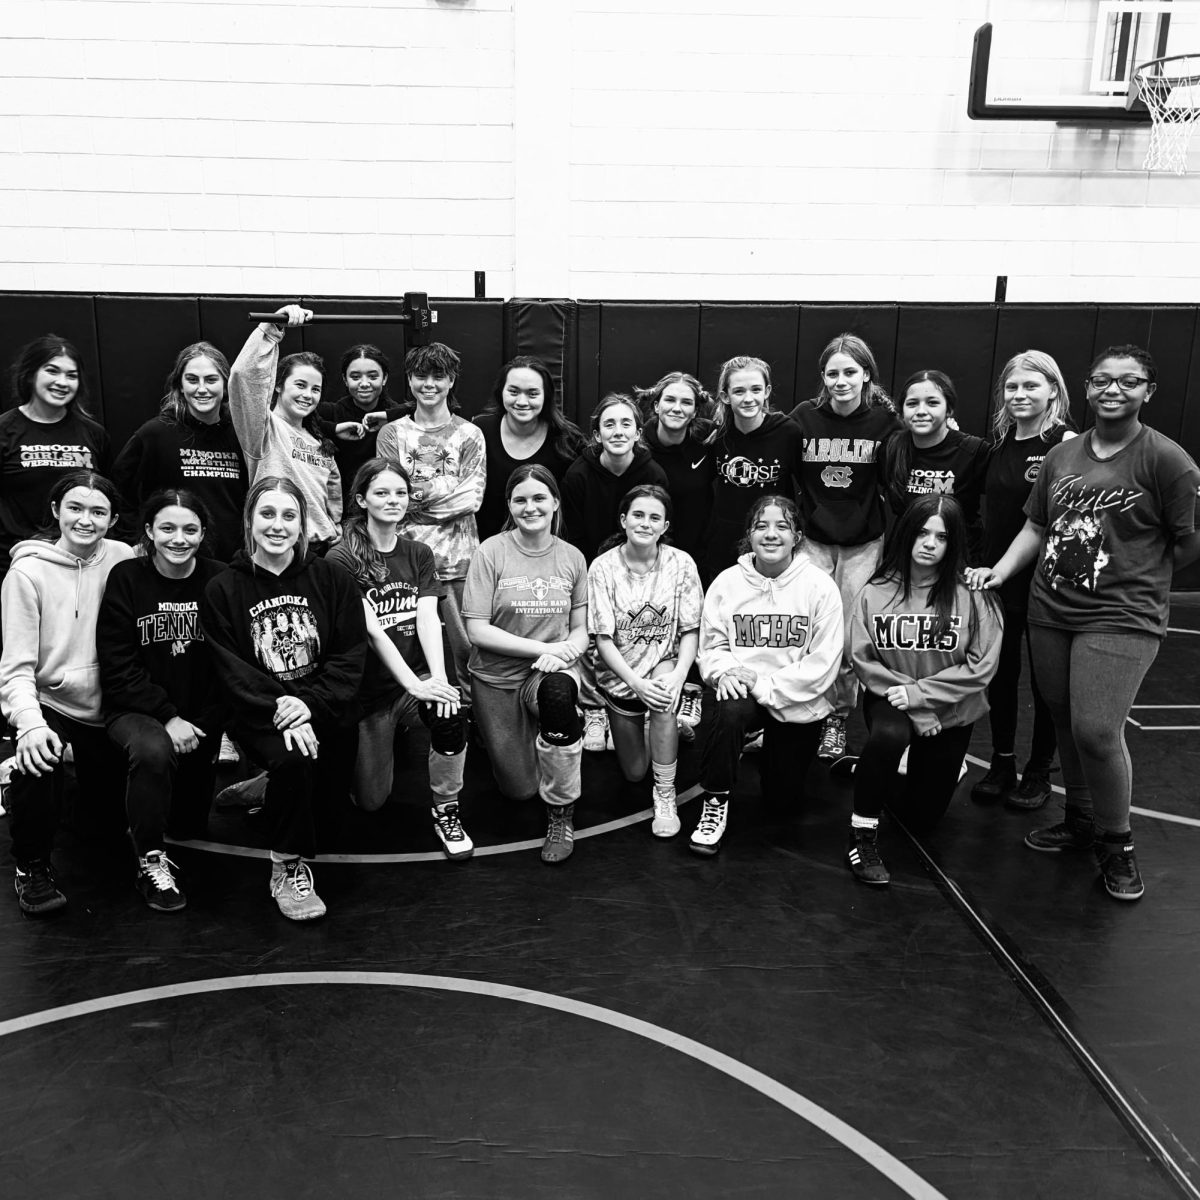 Freshmen+and+sophomore+girls+on+the+wrestling+team+take+a+photo+after+practice+on+Dec.+7.